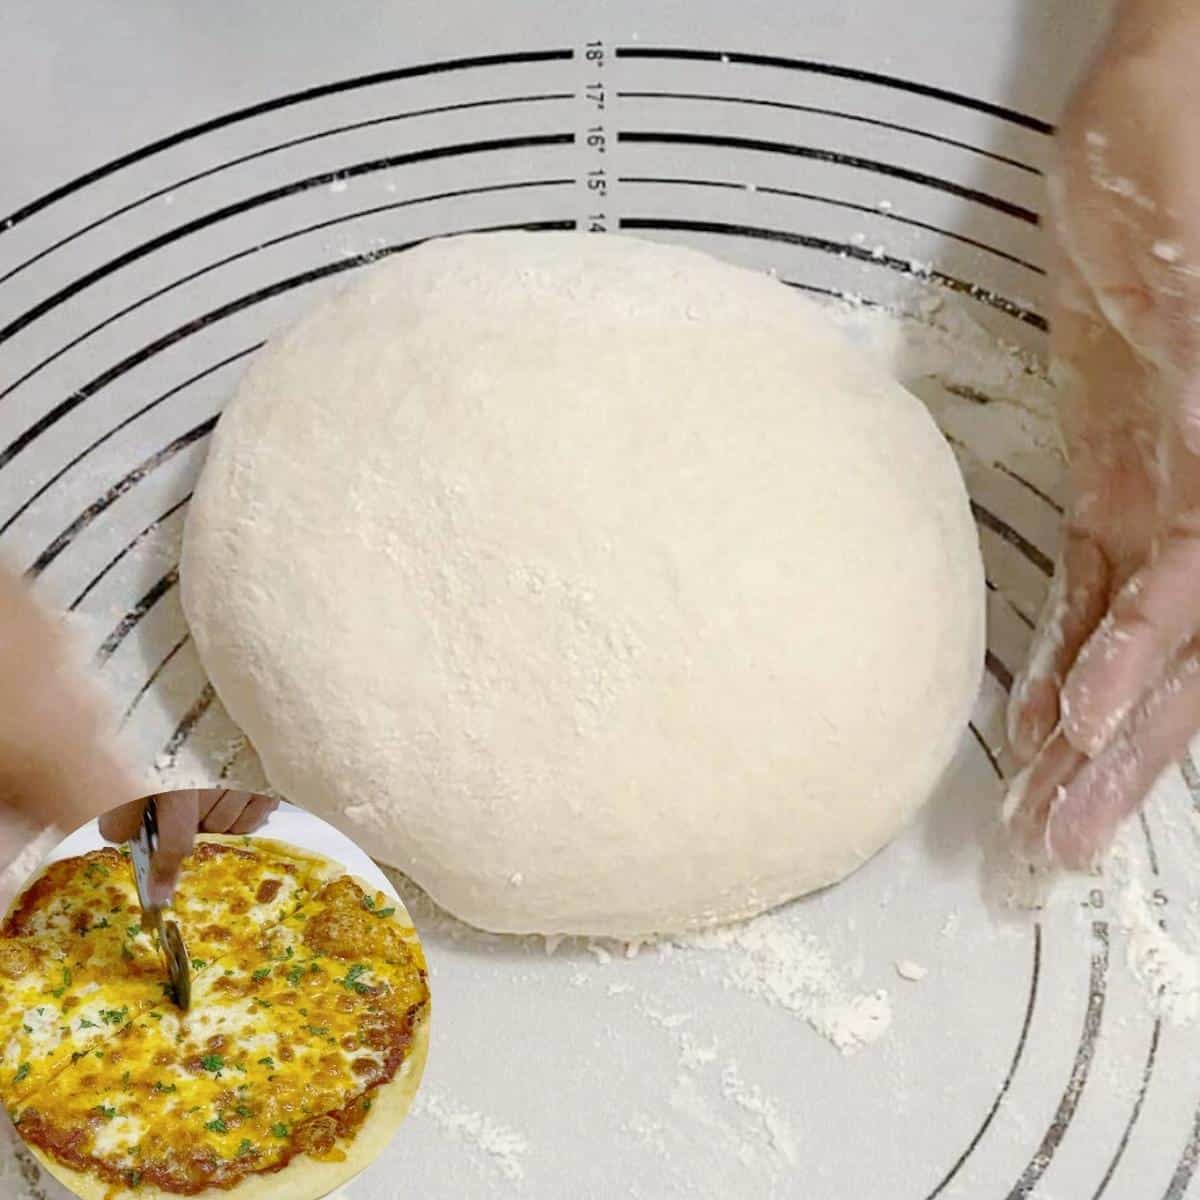 Shaping the pizza dough no-knead.